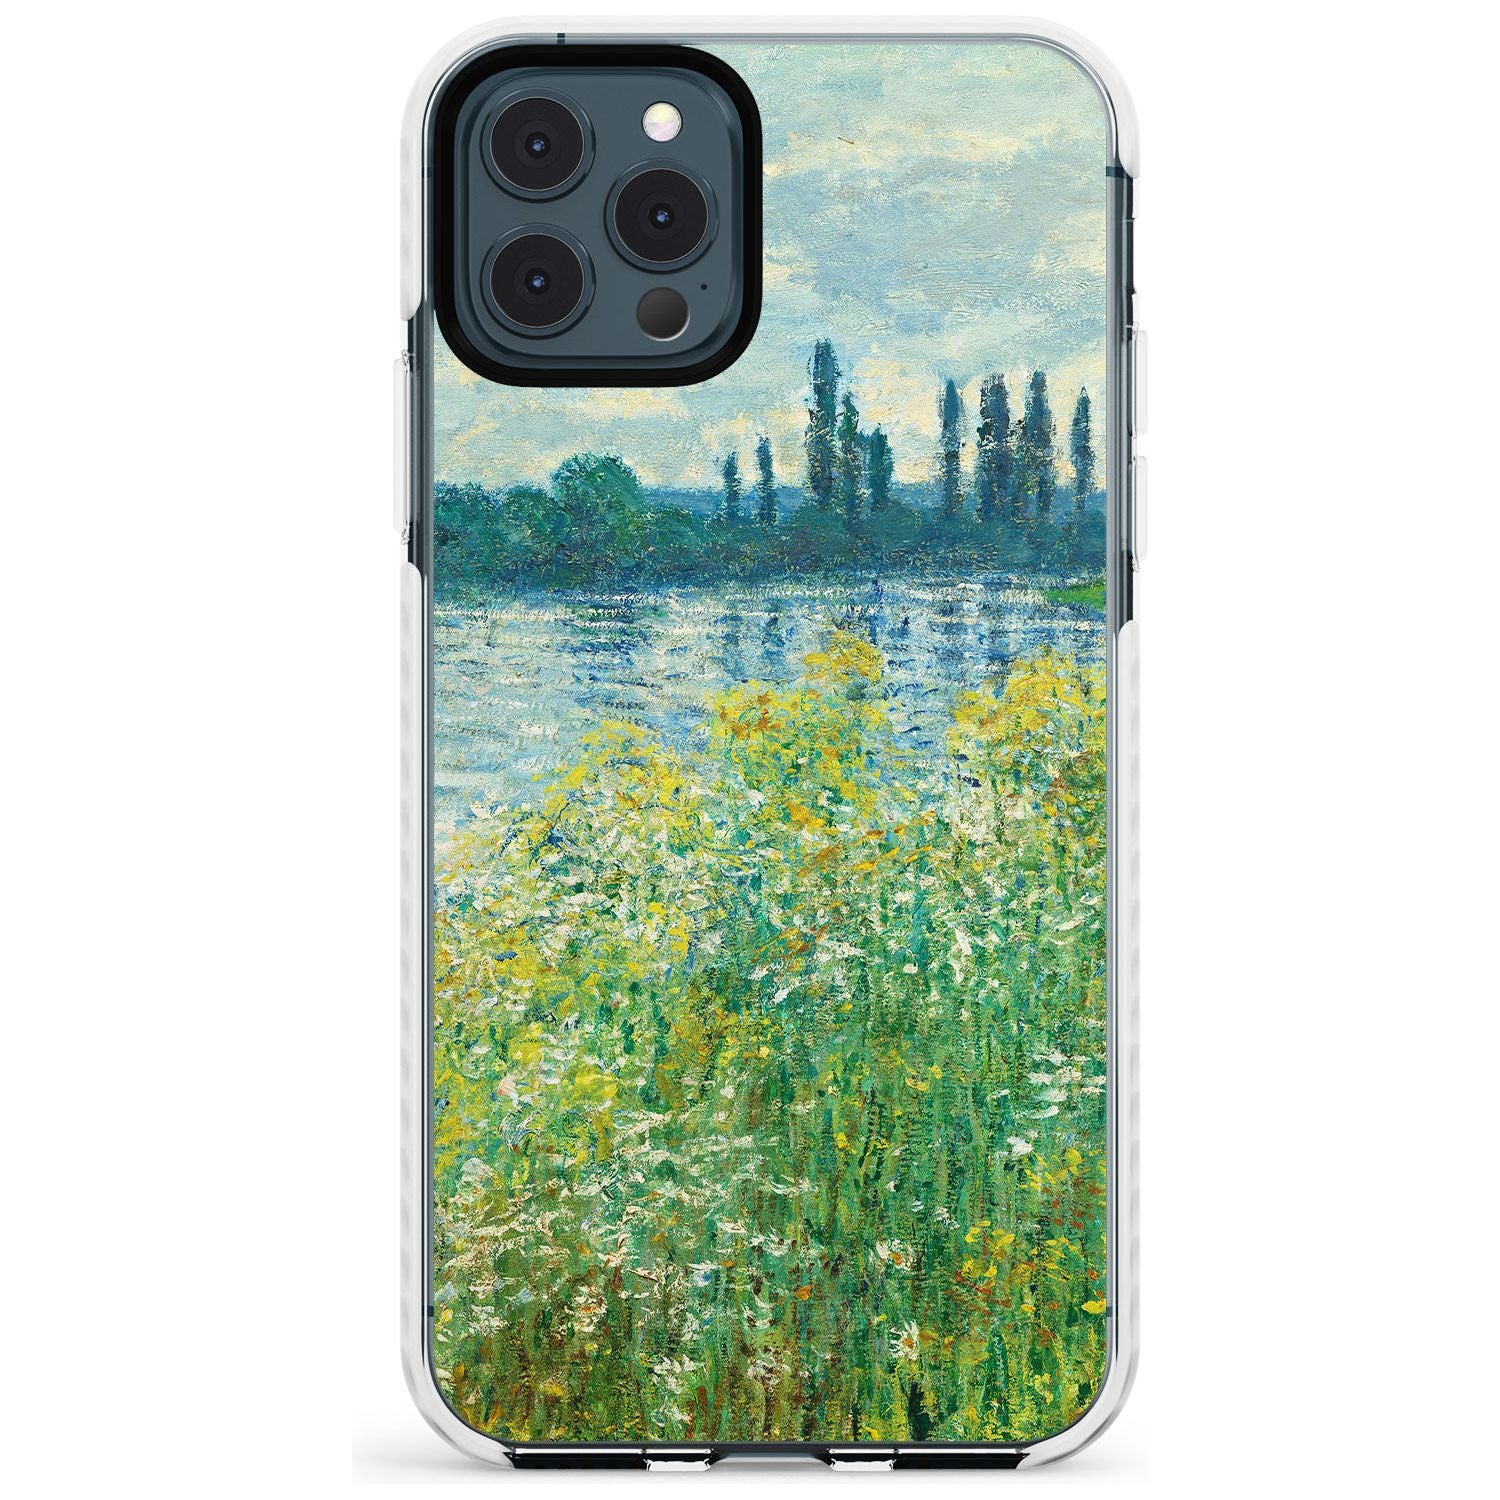 Banks of the Seine by Claude Monet Slim TPU Phone Case for iPhone 11 Pro Max